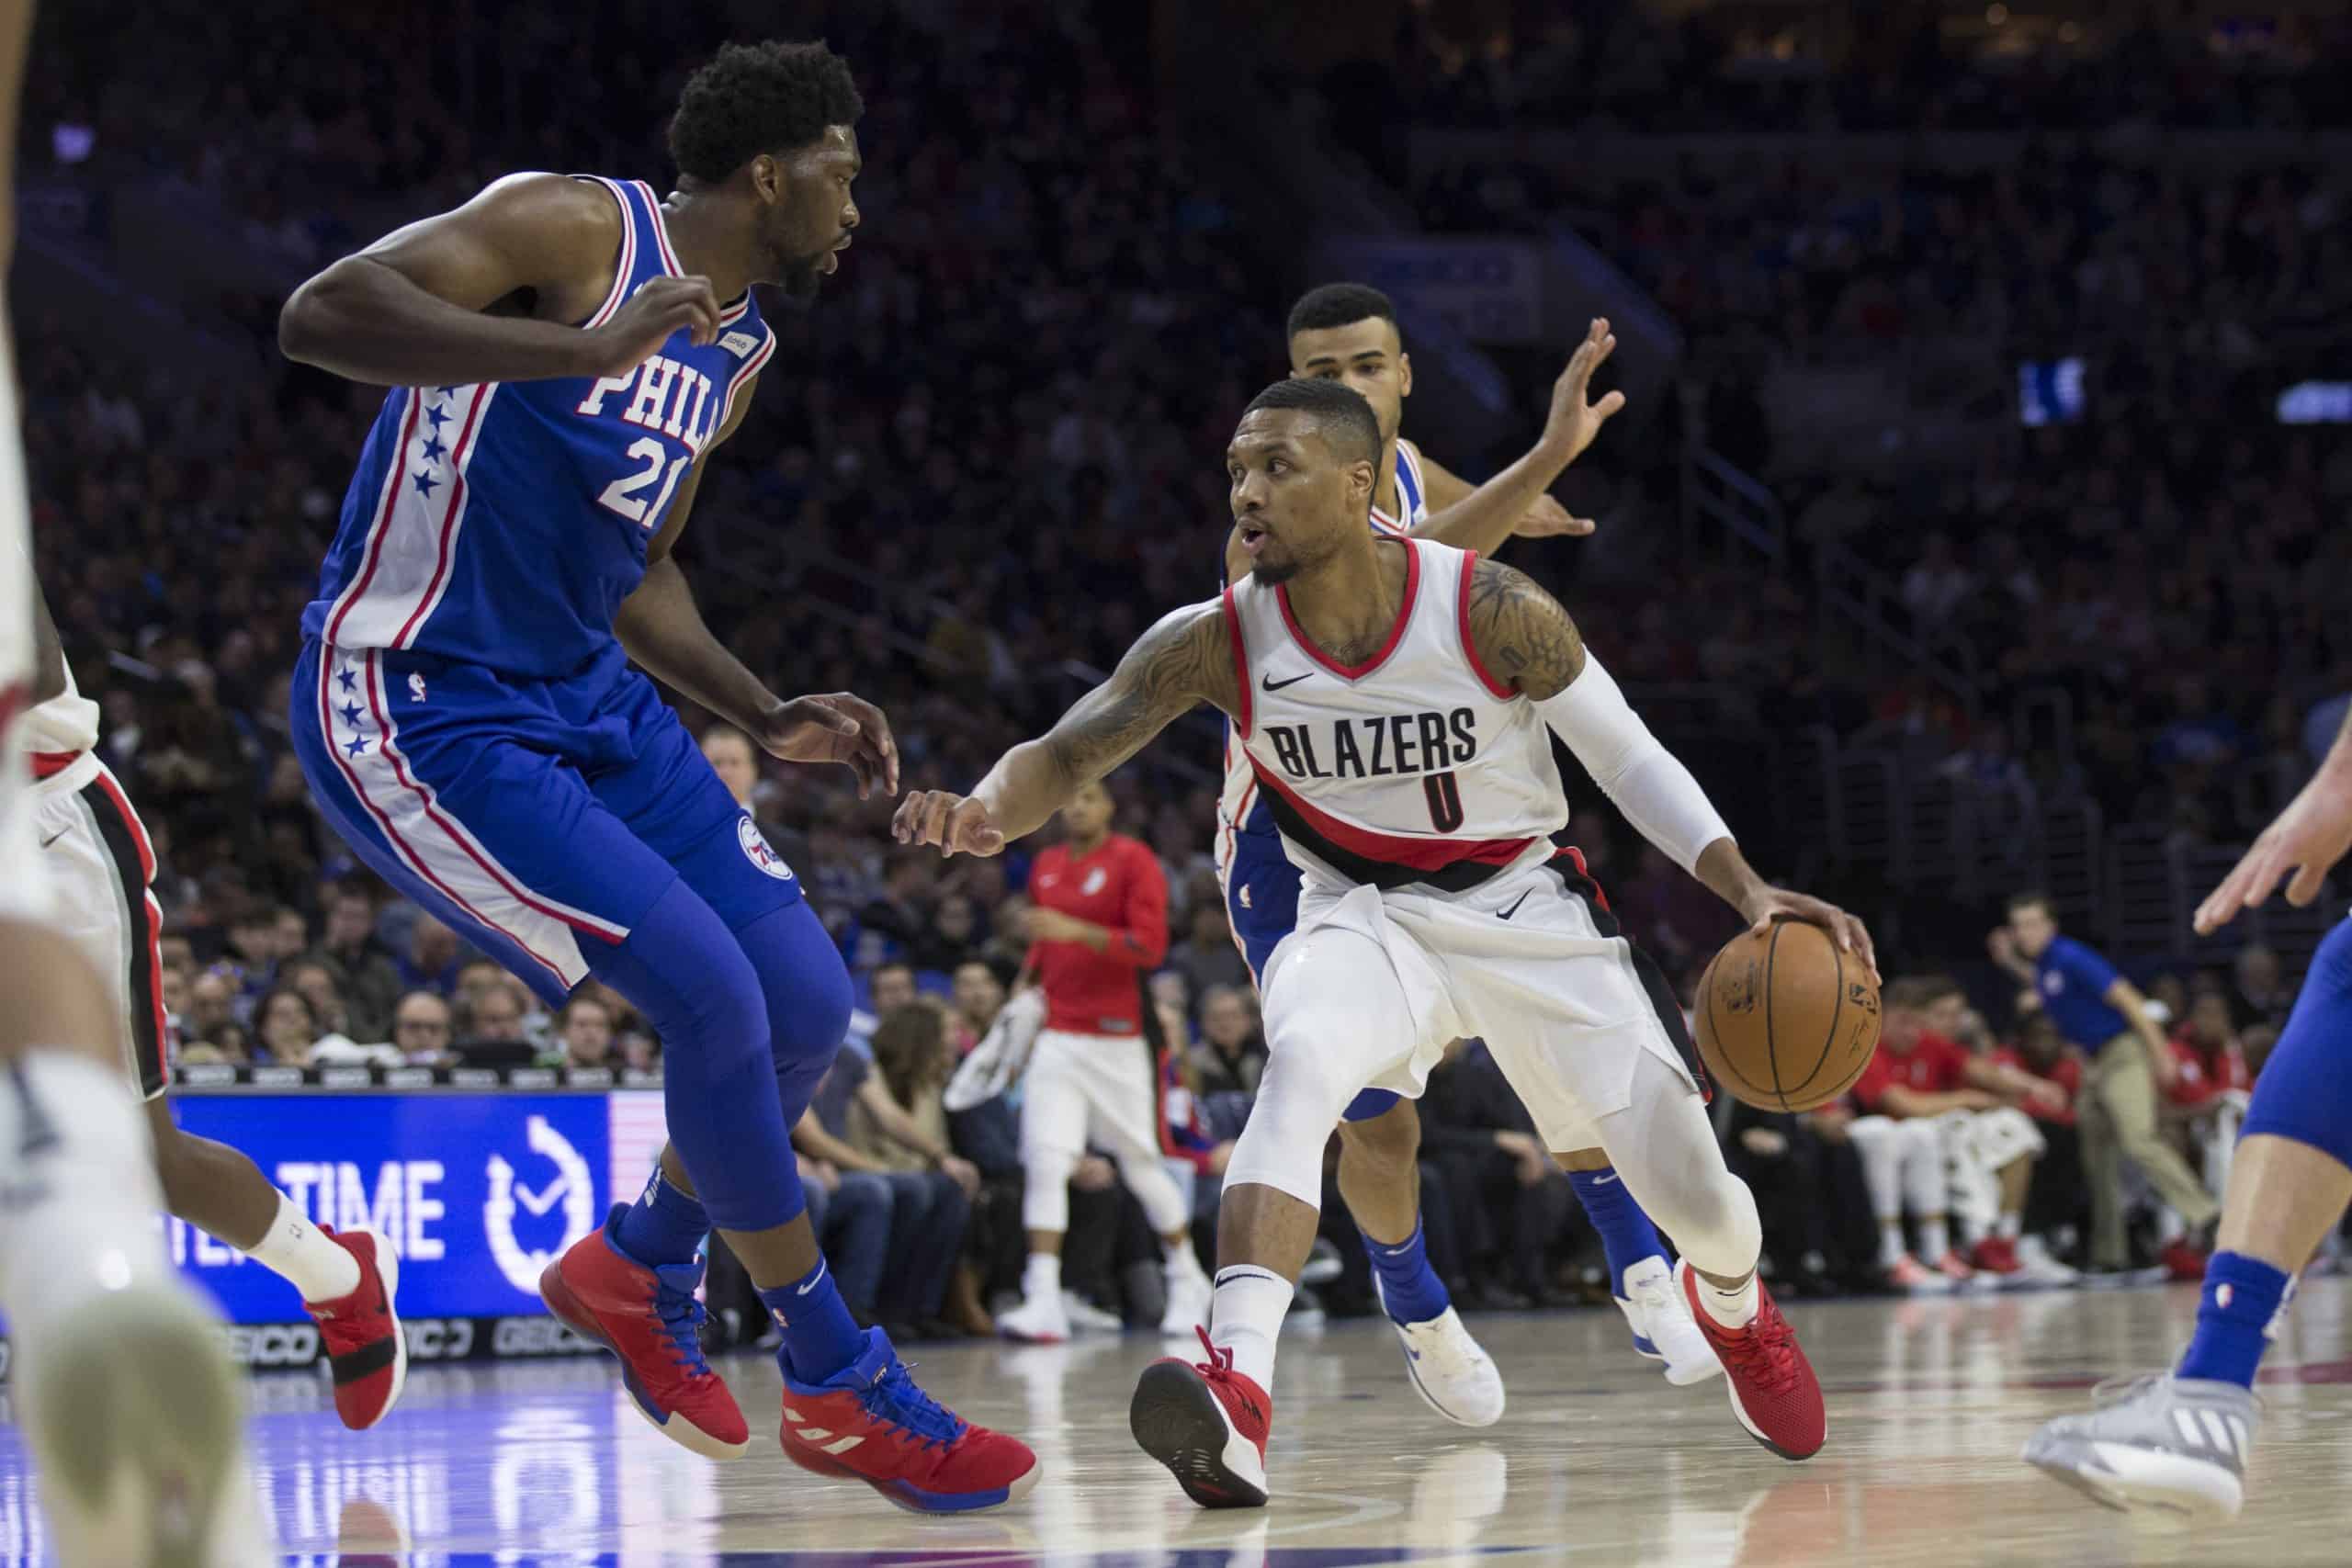 February 11th 76ers at Trail Blazers